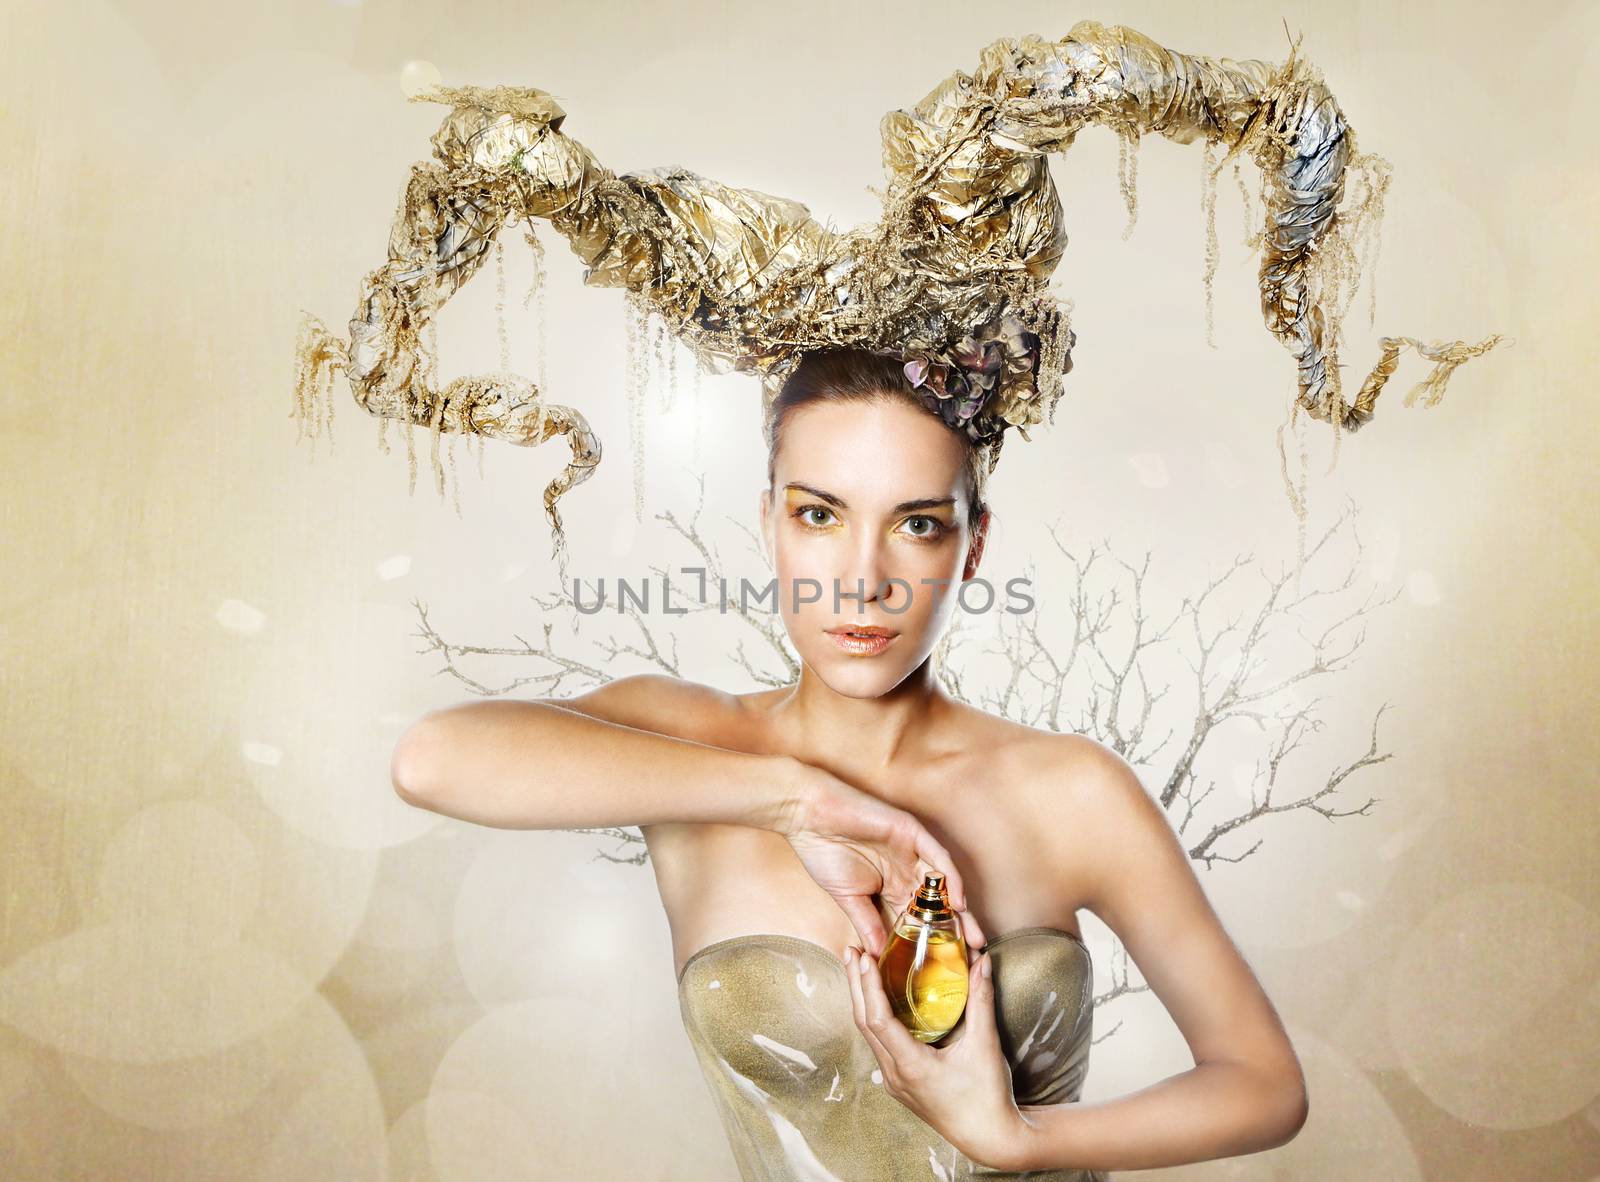 woman with golden horns is holding a perfume bottle